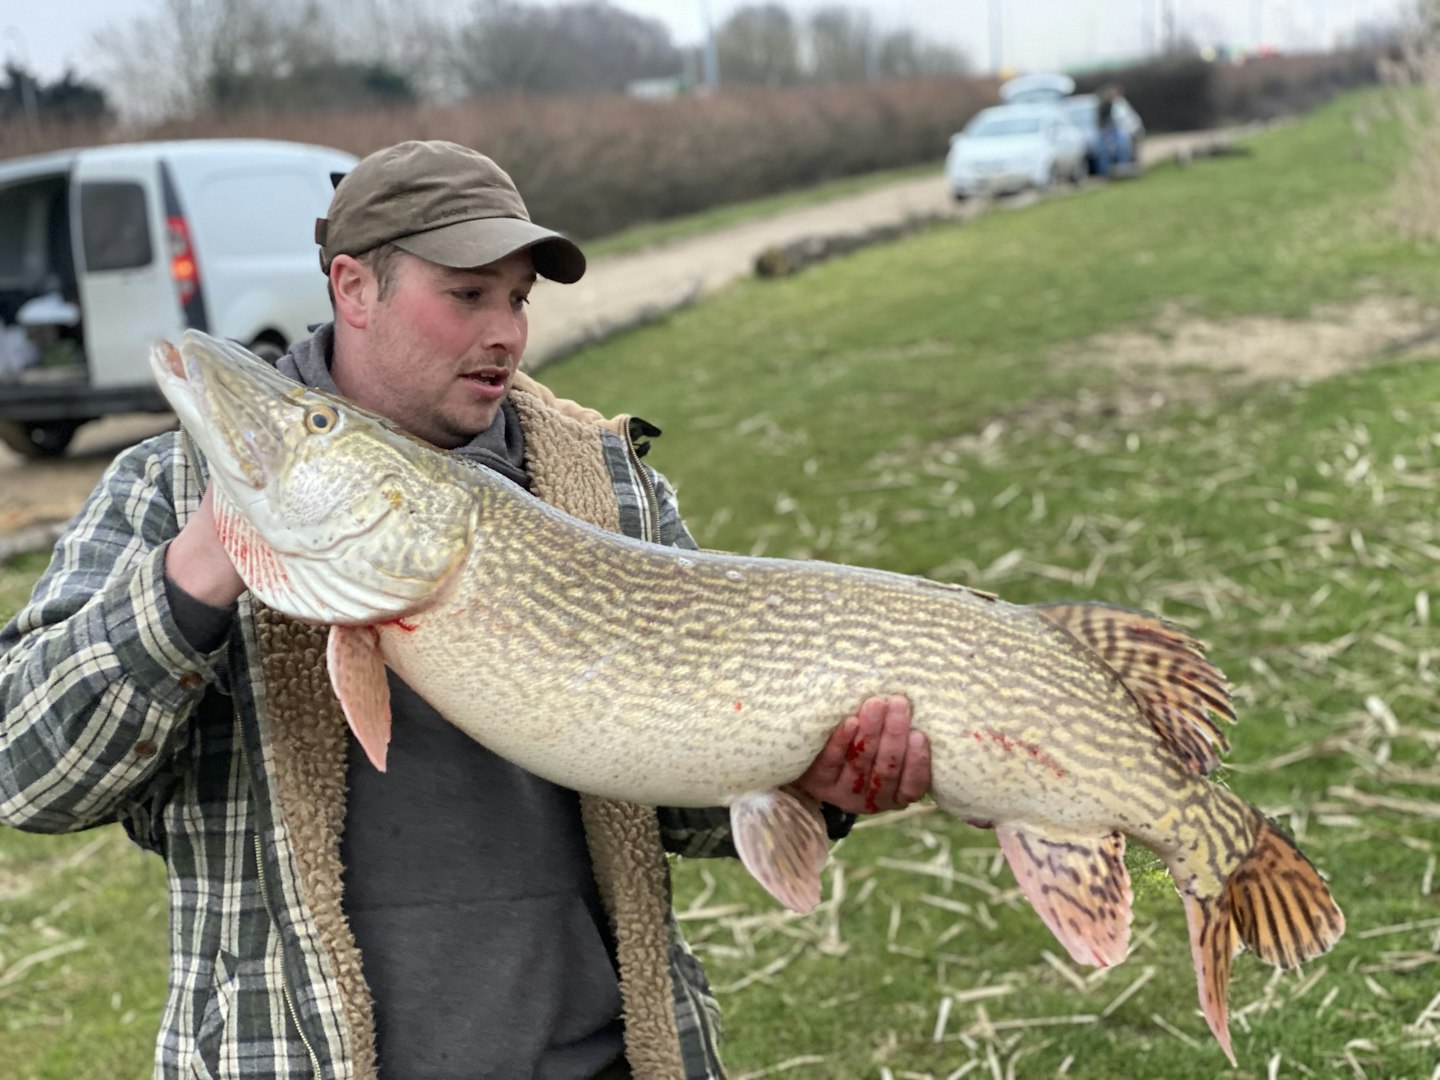 Daniel Dale had just 20 minutes of the session left when this 31lb 4oz pike picked up his bait